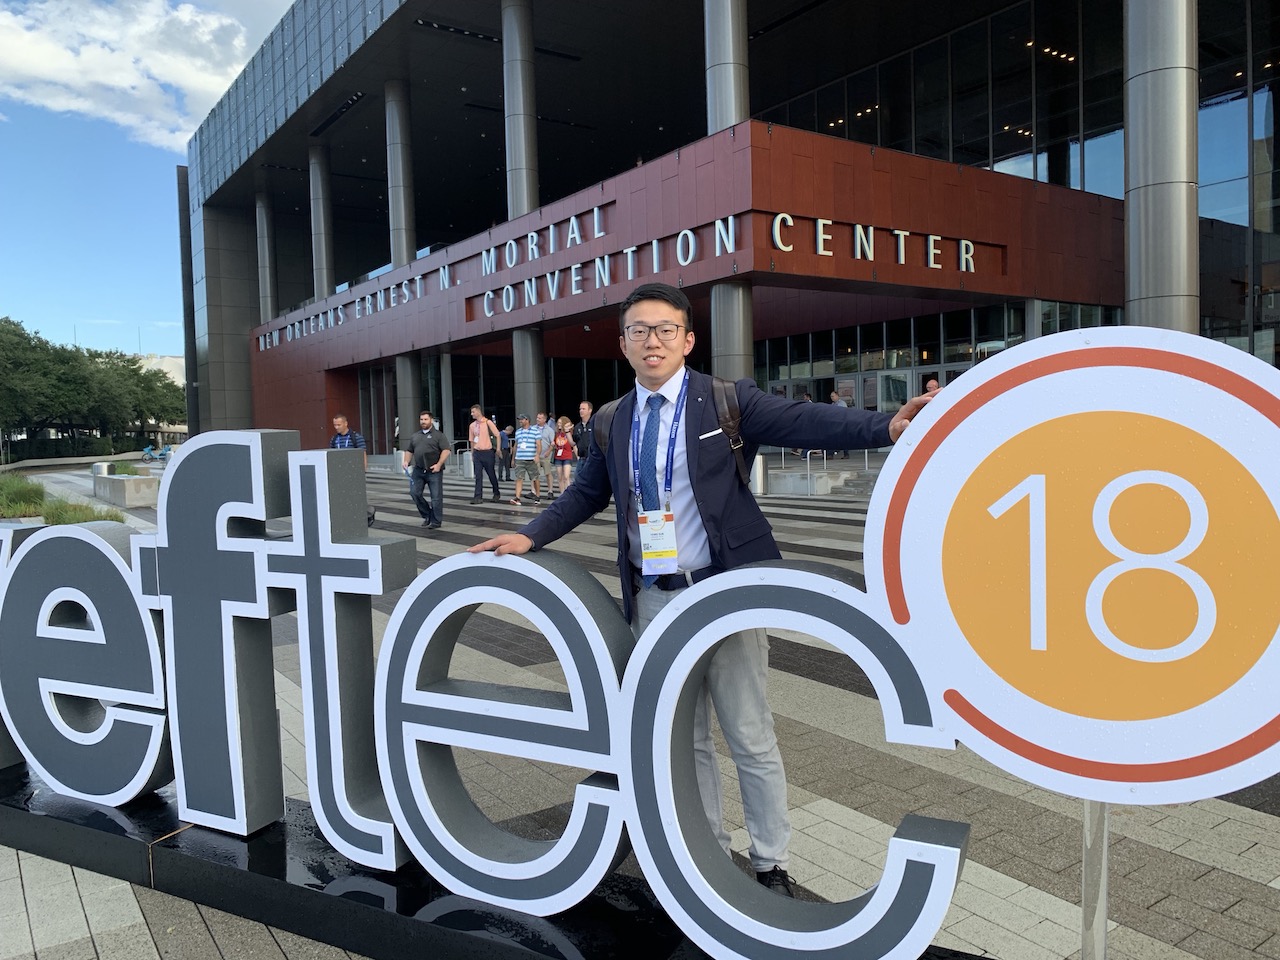 Yewei oral presented his research about the mathematical modeling of ozonation/biofiltration for potable water reuse at the 2018 Weftec conference in New Orleans, Louisiana, October 1-3